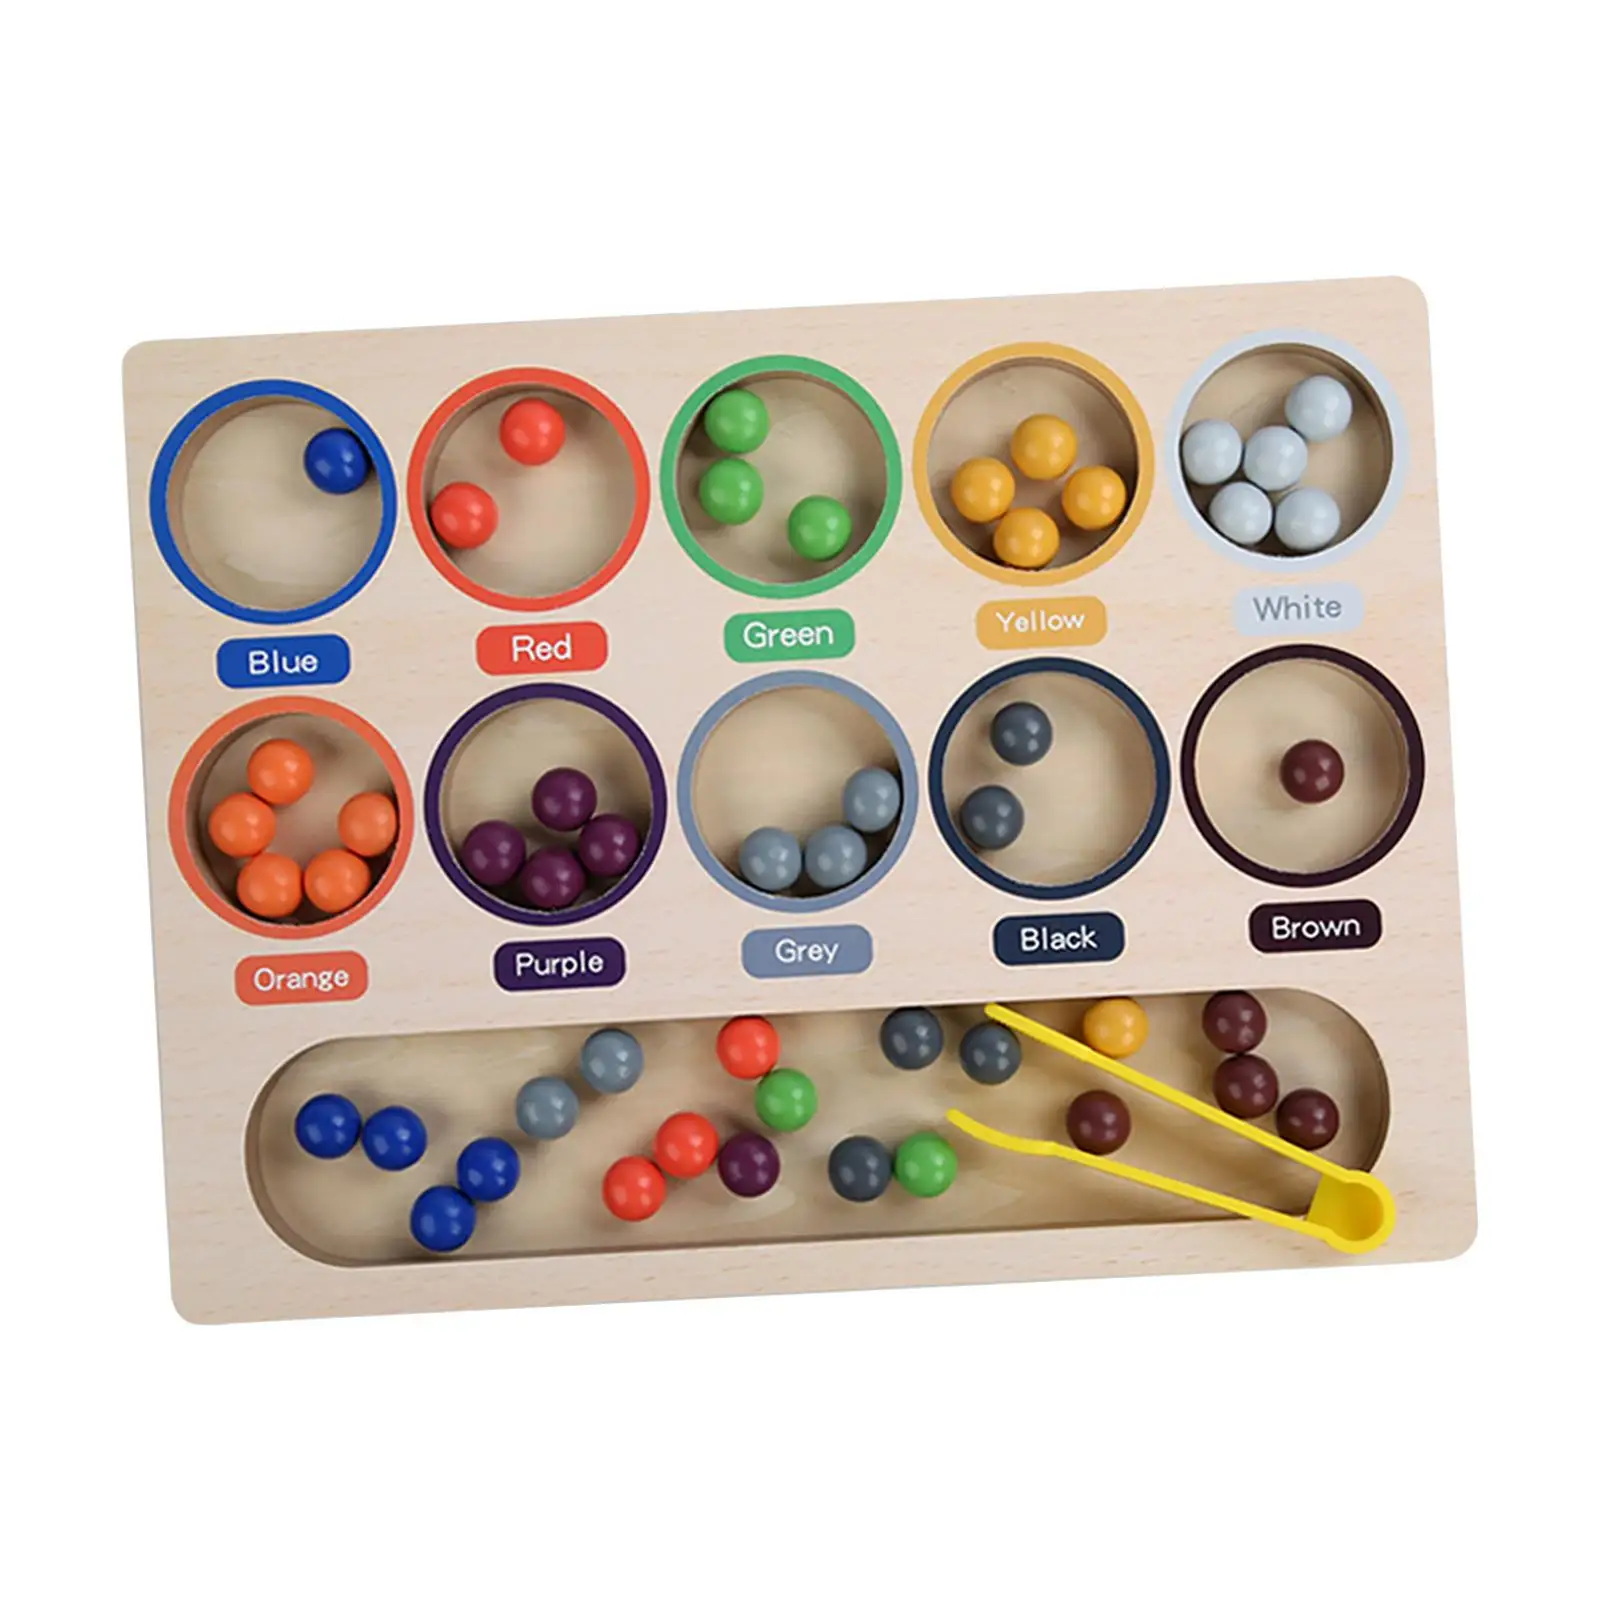 Montessori Toy Fine Motor Math Manipulatives Wooden Peg Board Game Wooden Board Bead Game for Kids Children Girls and Boys